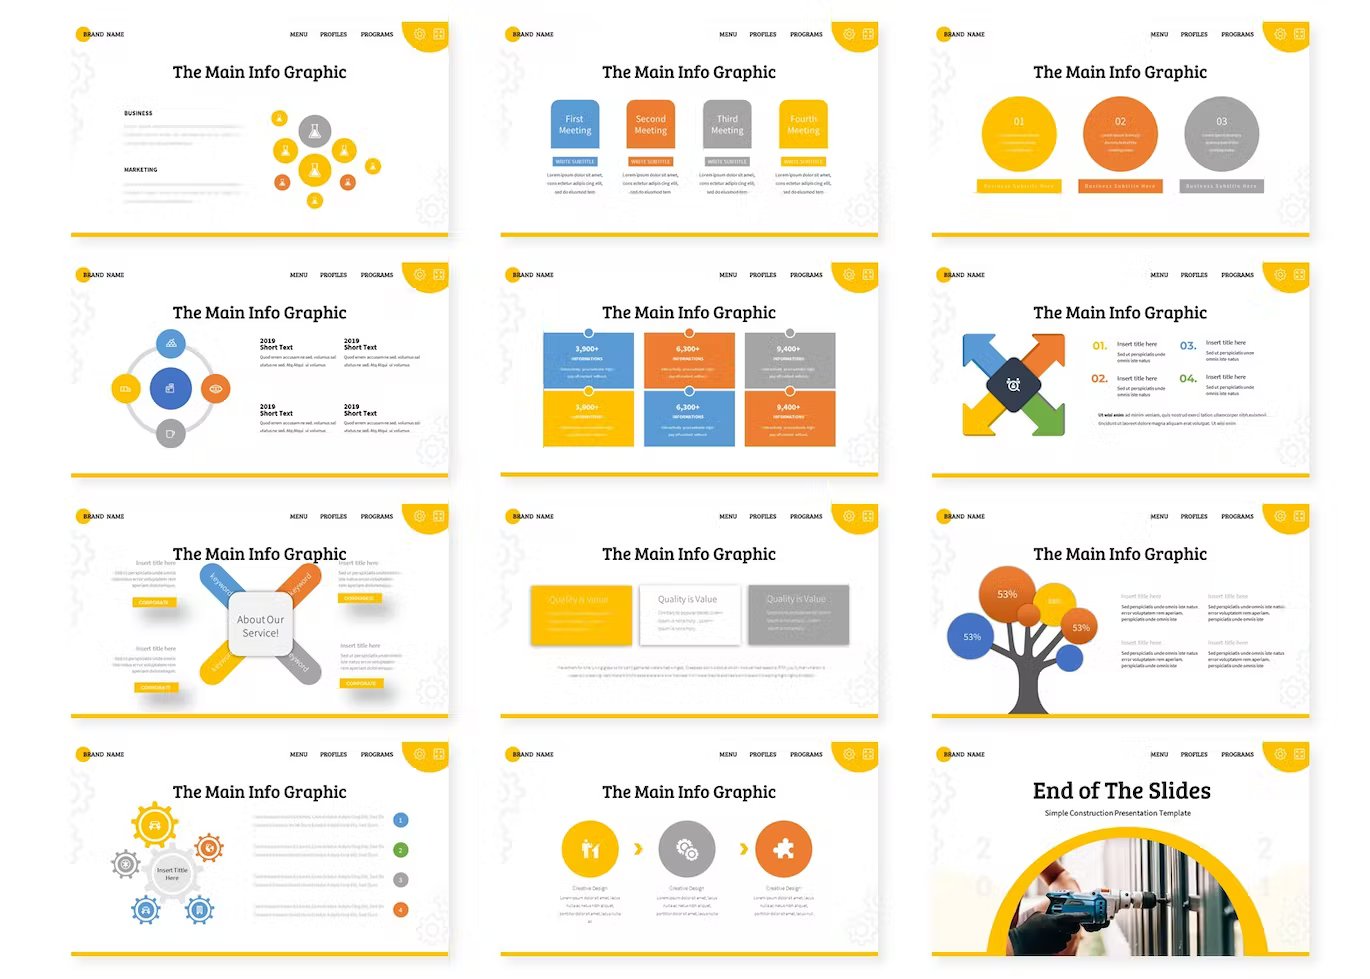 A set of 12 different project to construct presentation templates in white, yellow, gray, blue, orange and black on a white background.